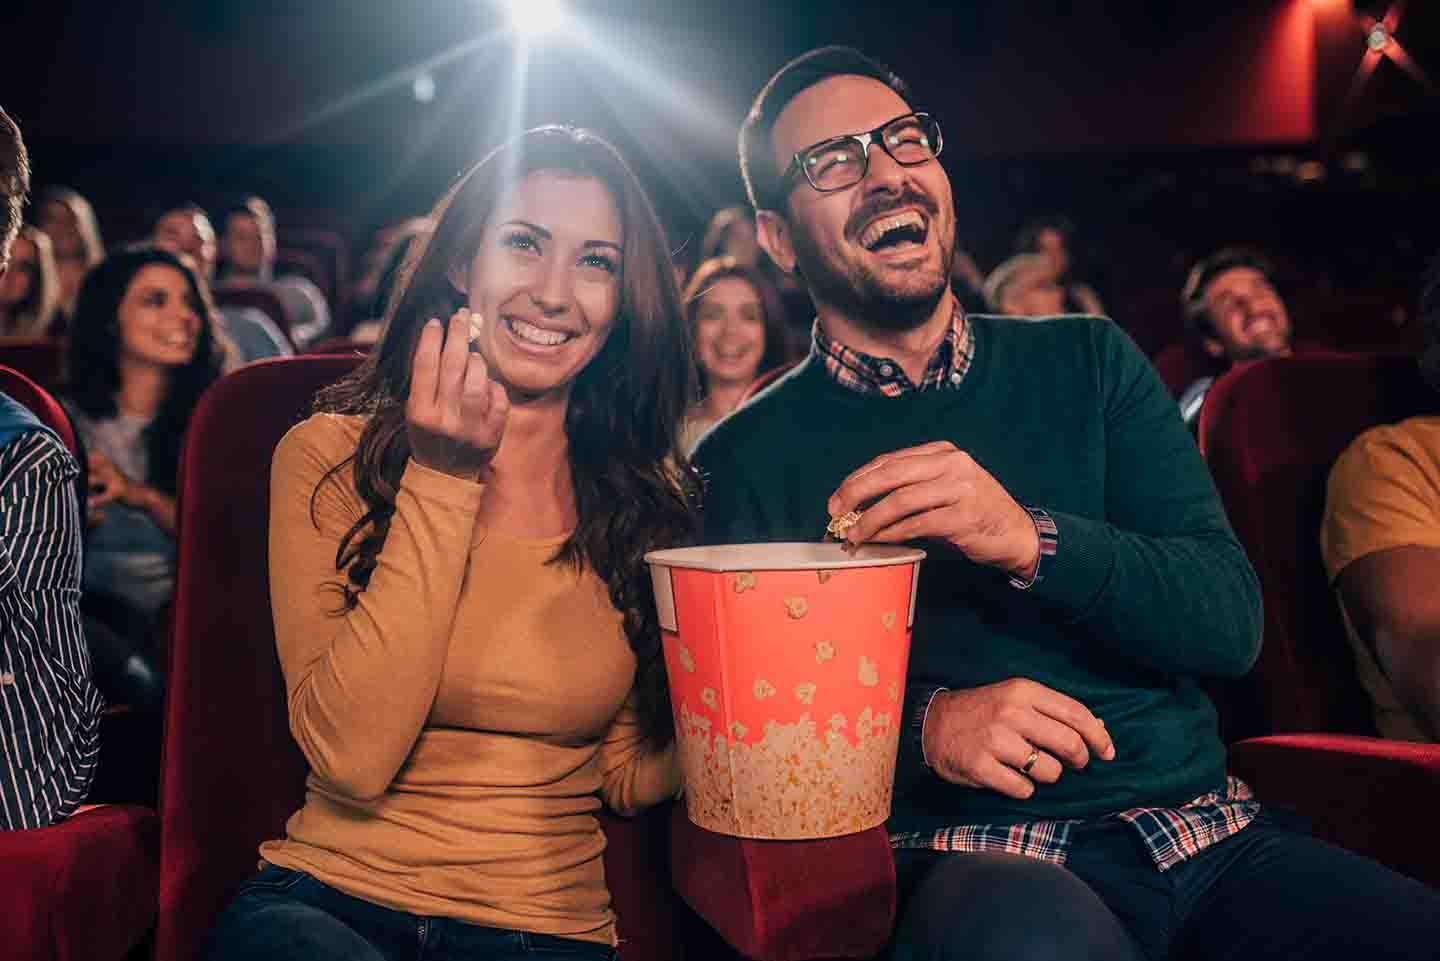 A couple enjoying a movie together at the theatre